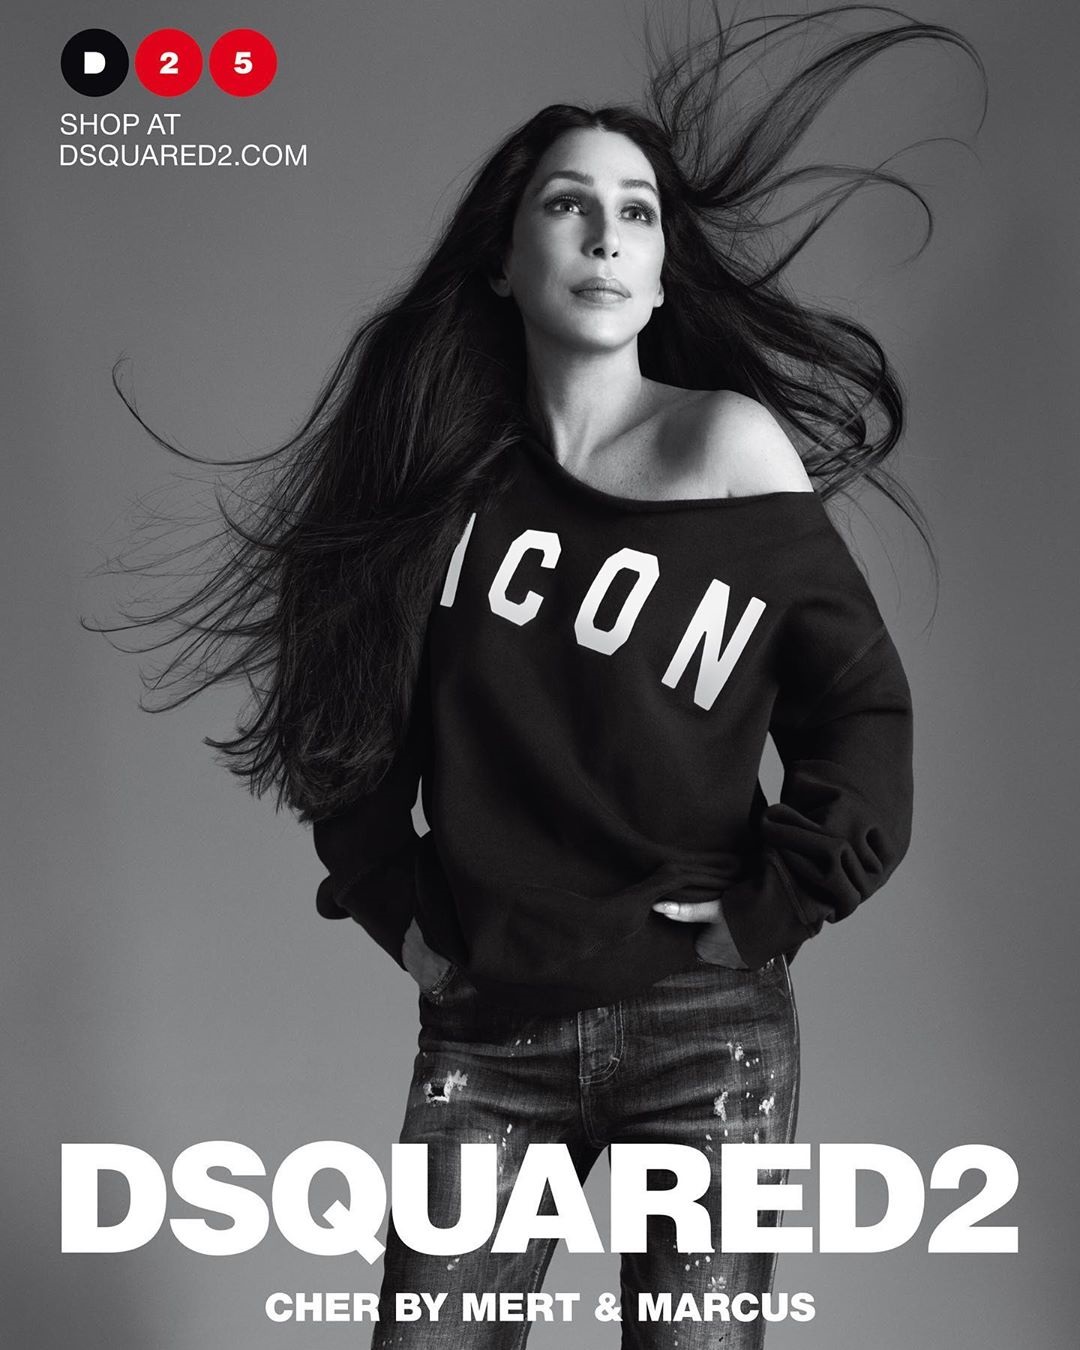 Cher has retweeted fans excited to spot the campaign's first billboards in New York City - teasing an ad for the DSquared2 campaign in Times Square